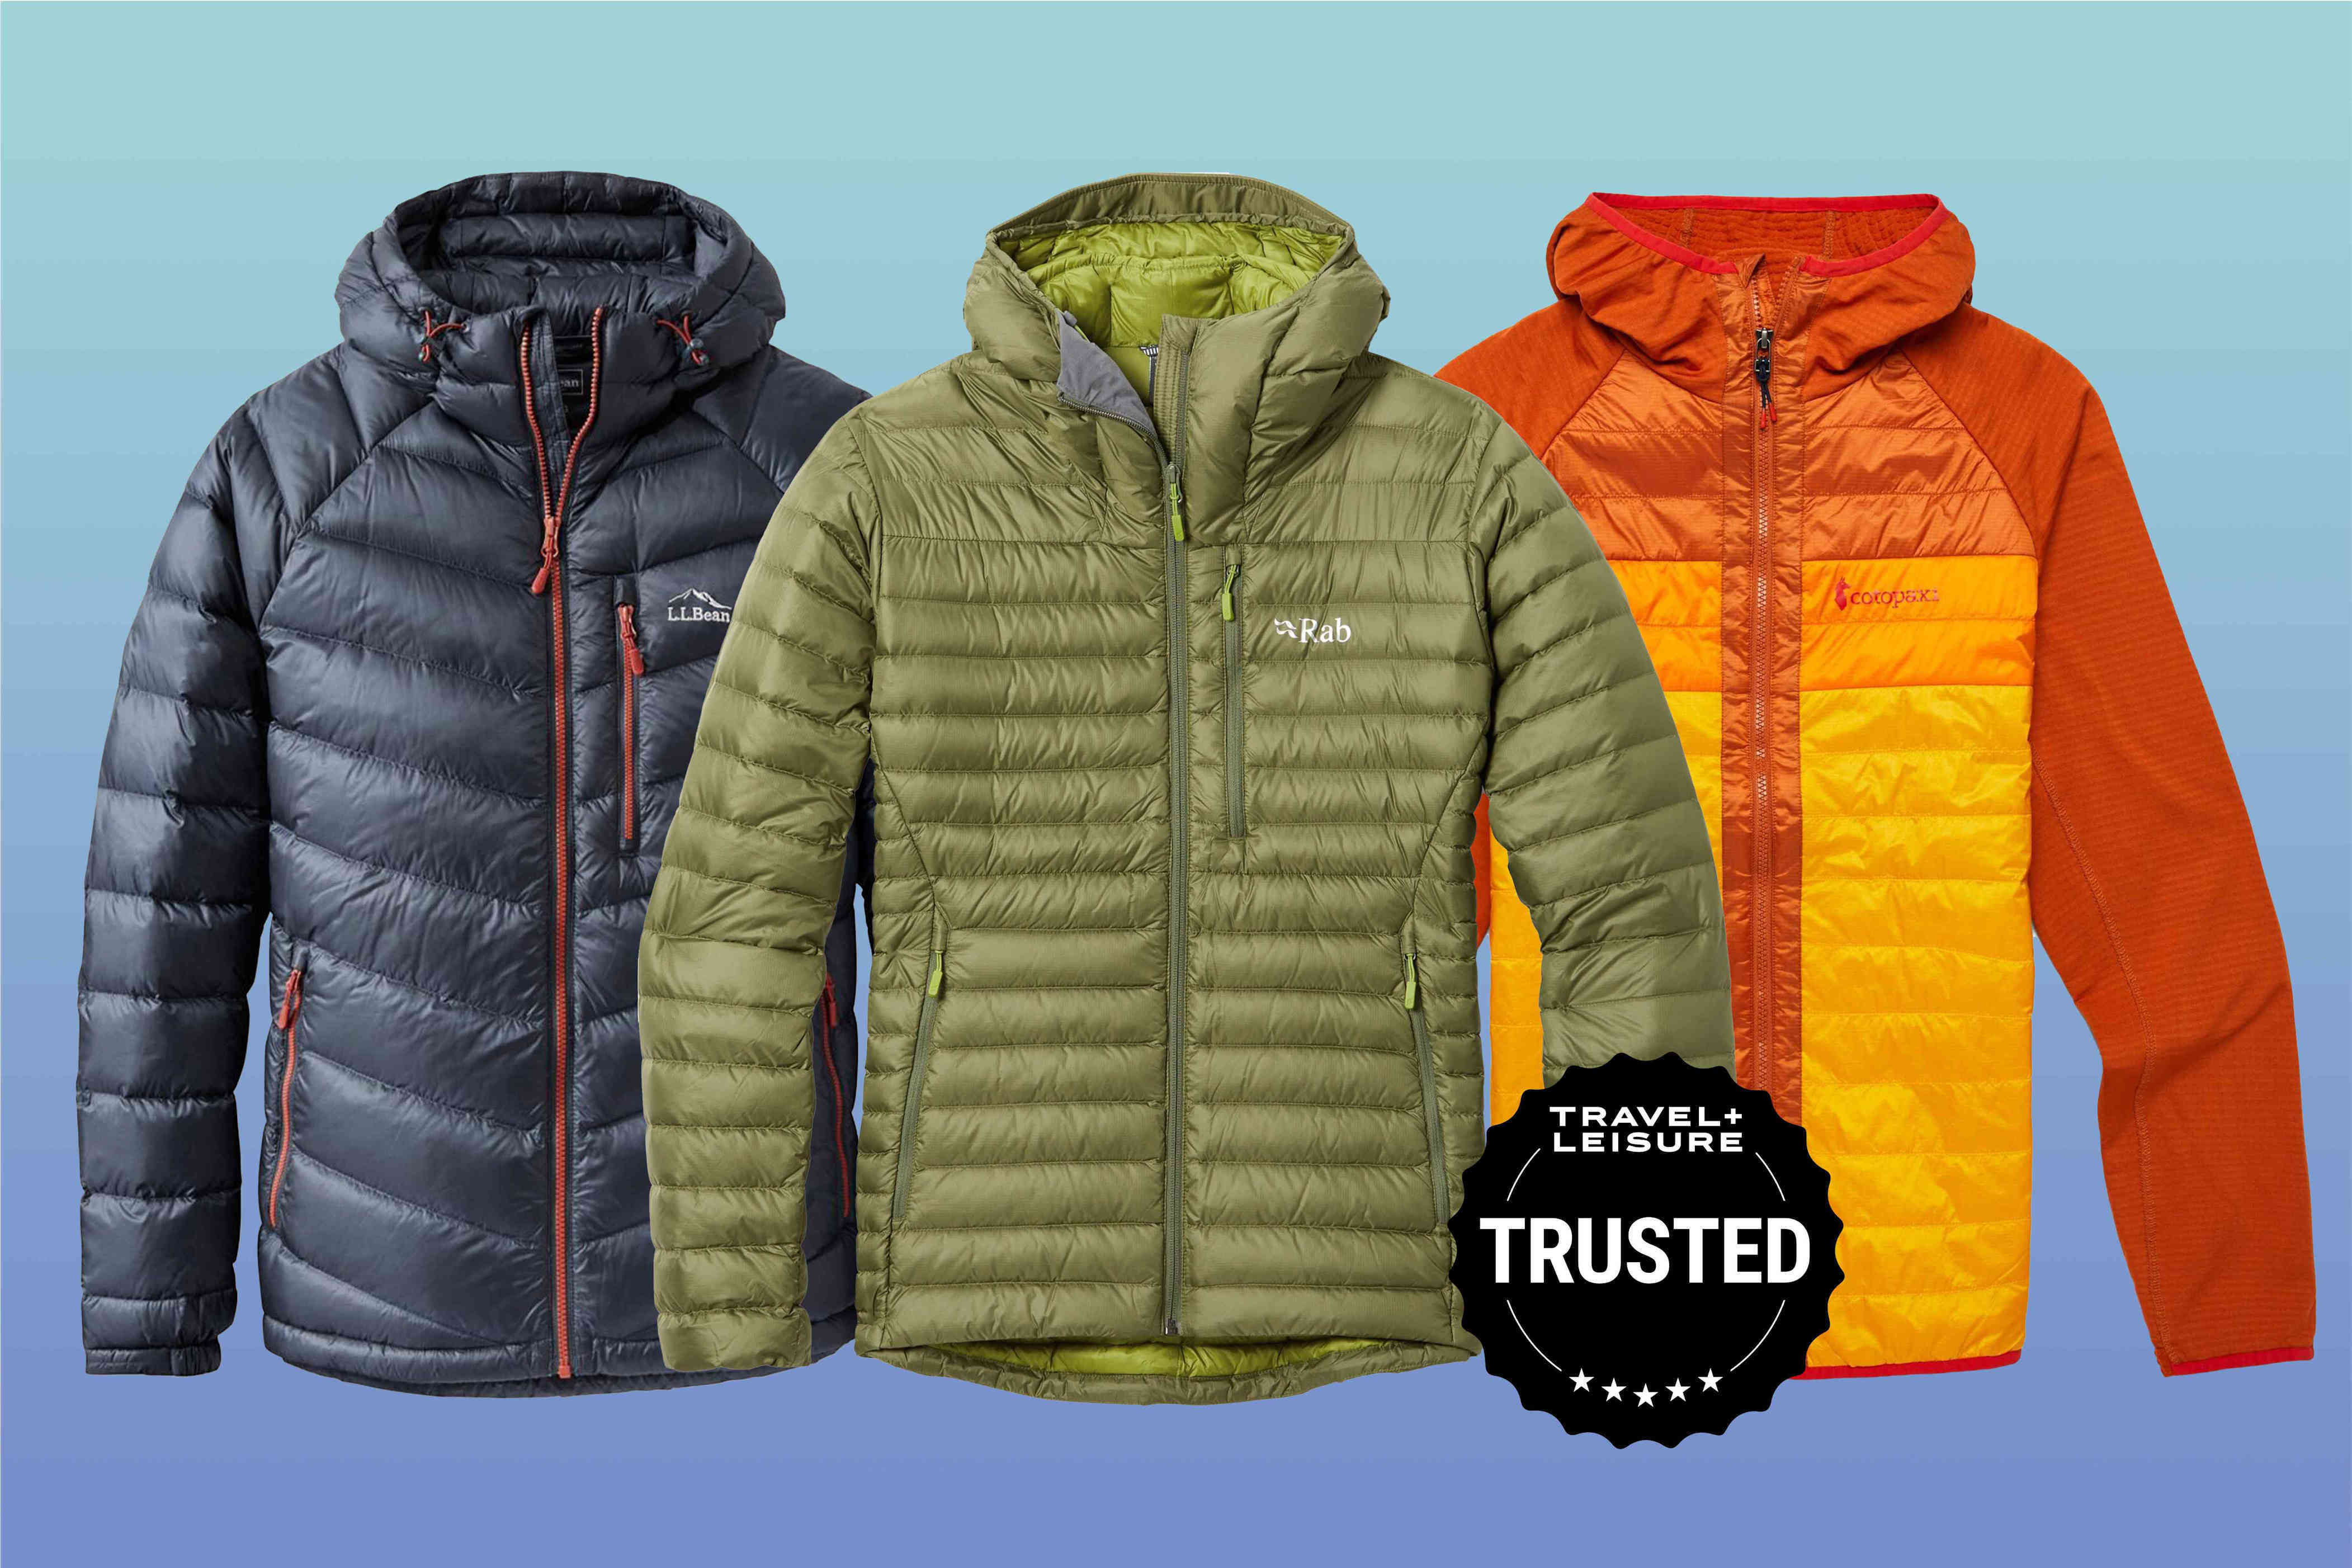 The 15 Best Men’s Packable Jackets for Hiking, Skiing, Running, and Beyond